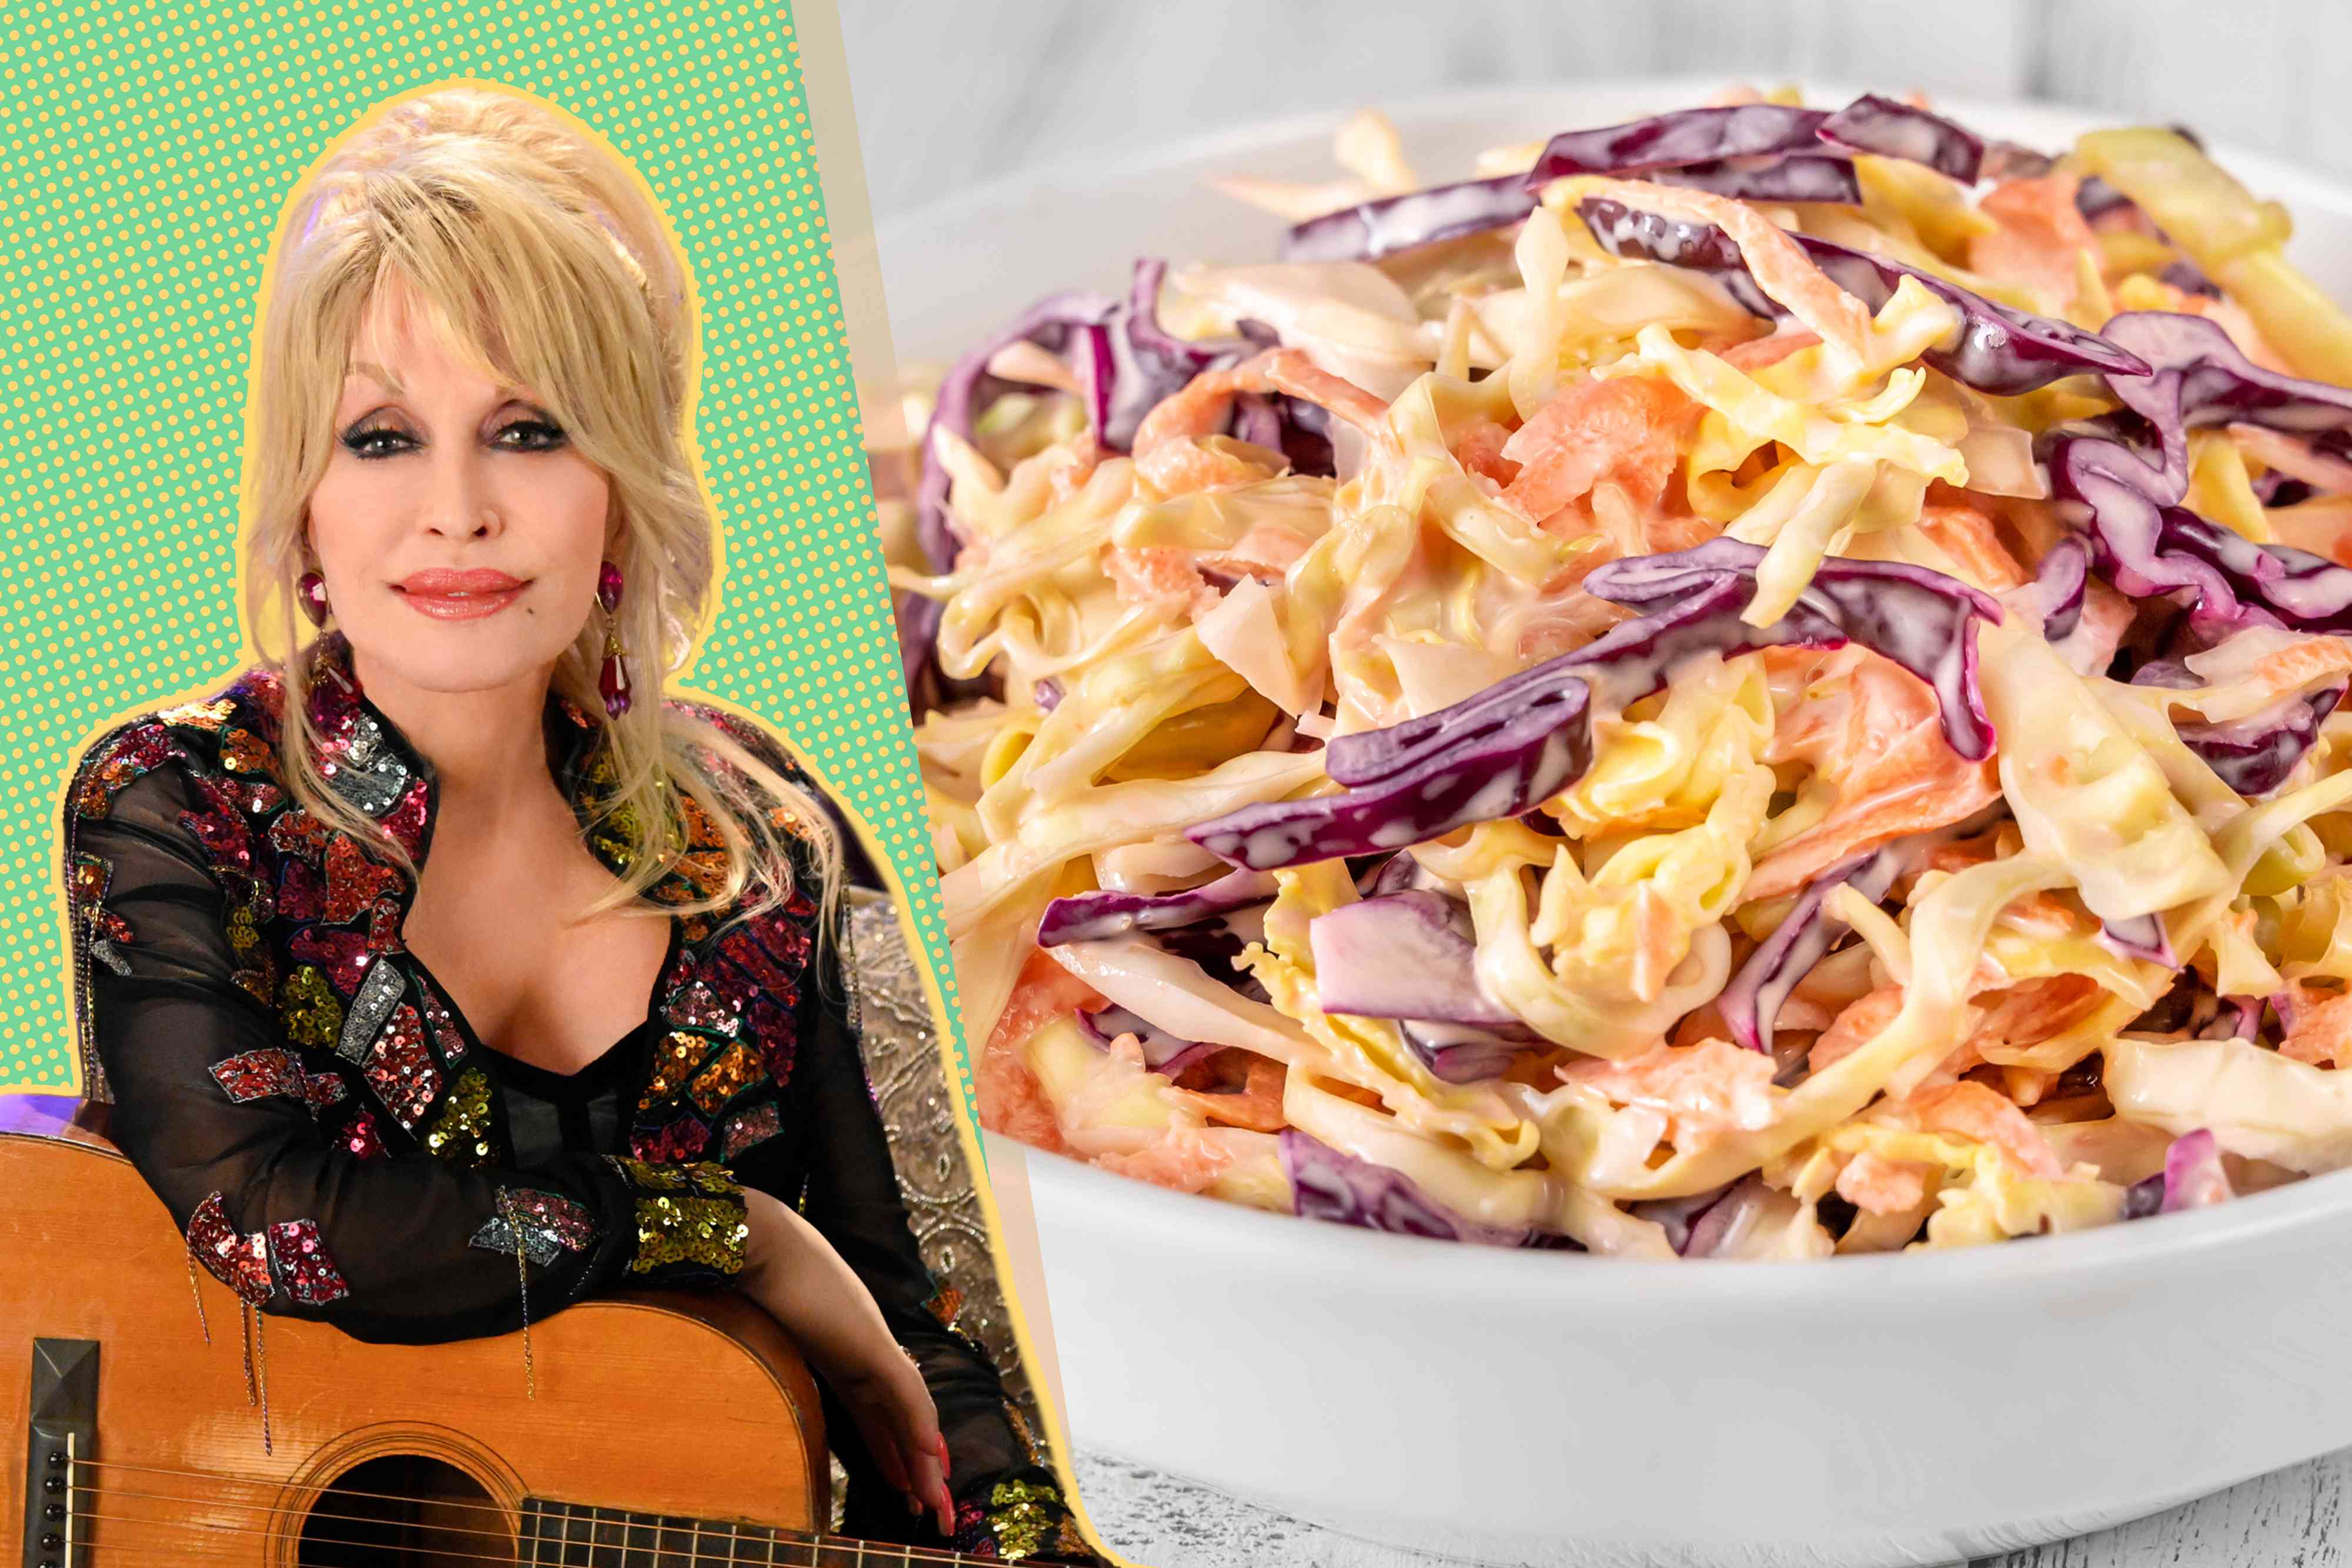 Dolly Parton's Coleslaw Has a Secret Ingredient That Blew My Socks Off